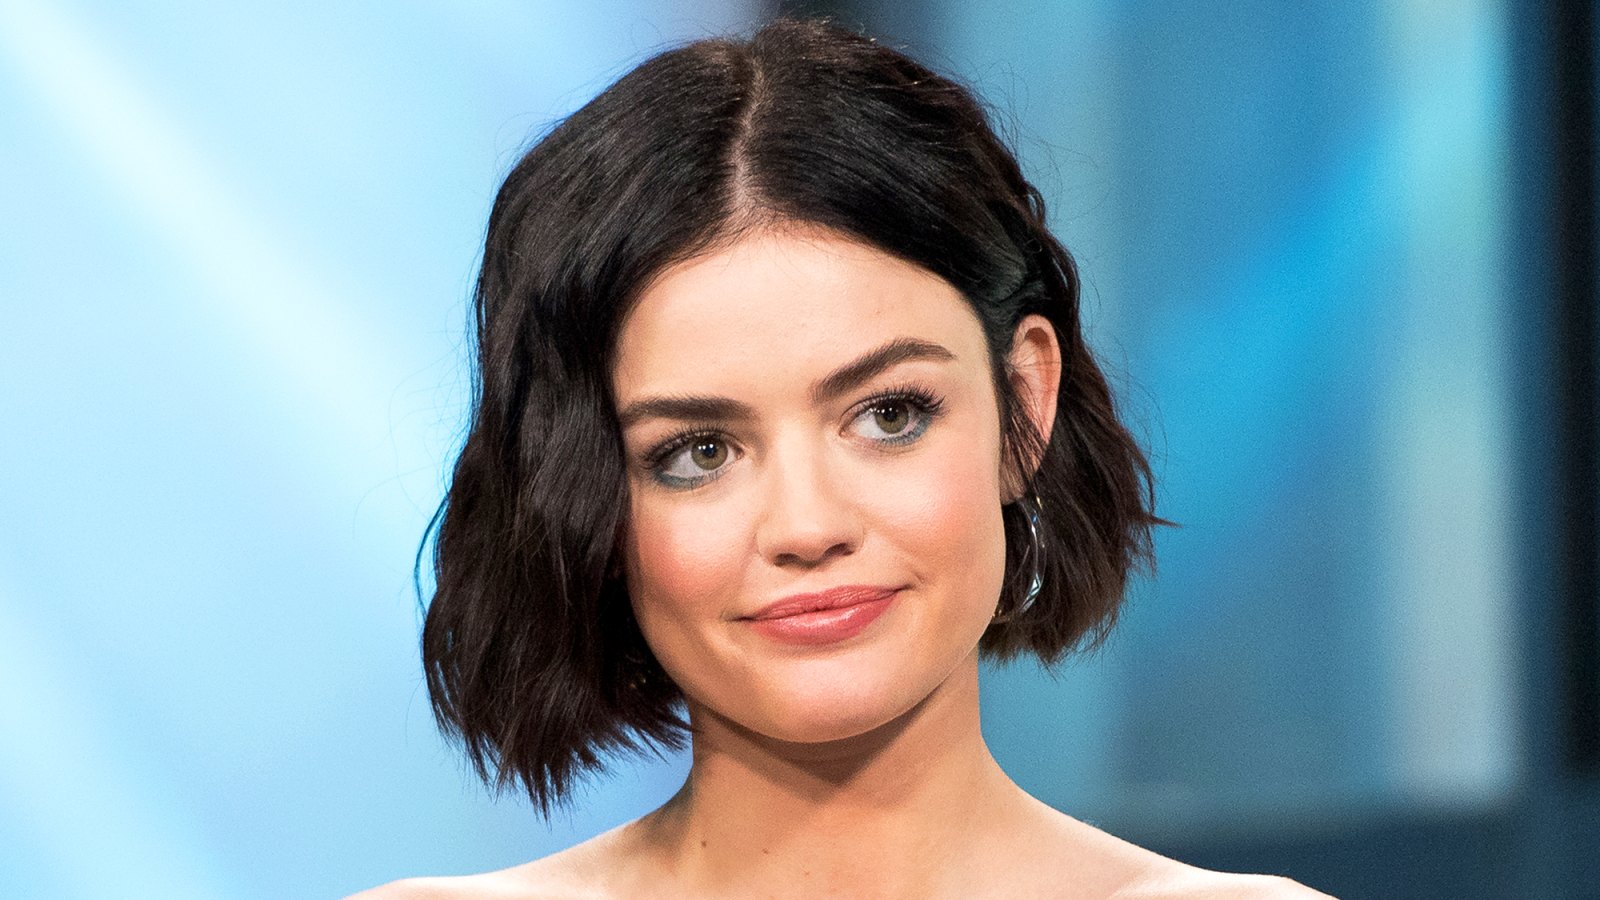 Lucy Hale visits Build Studios in New York City.